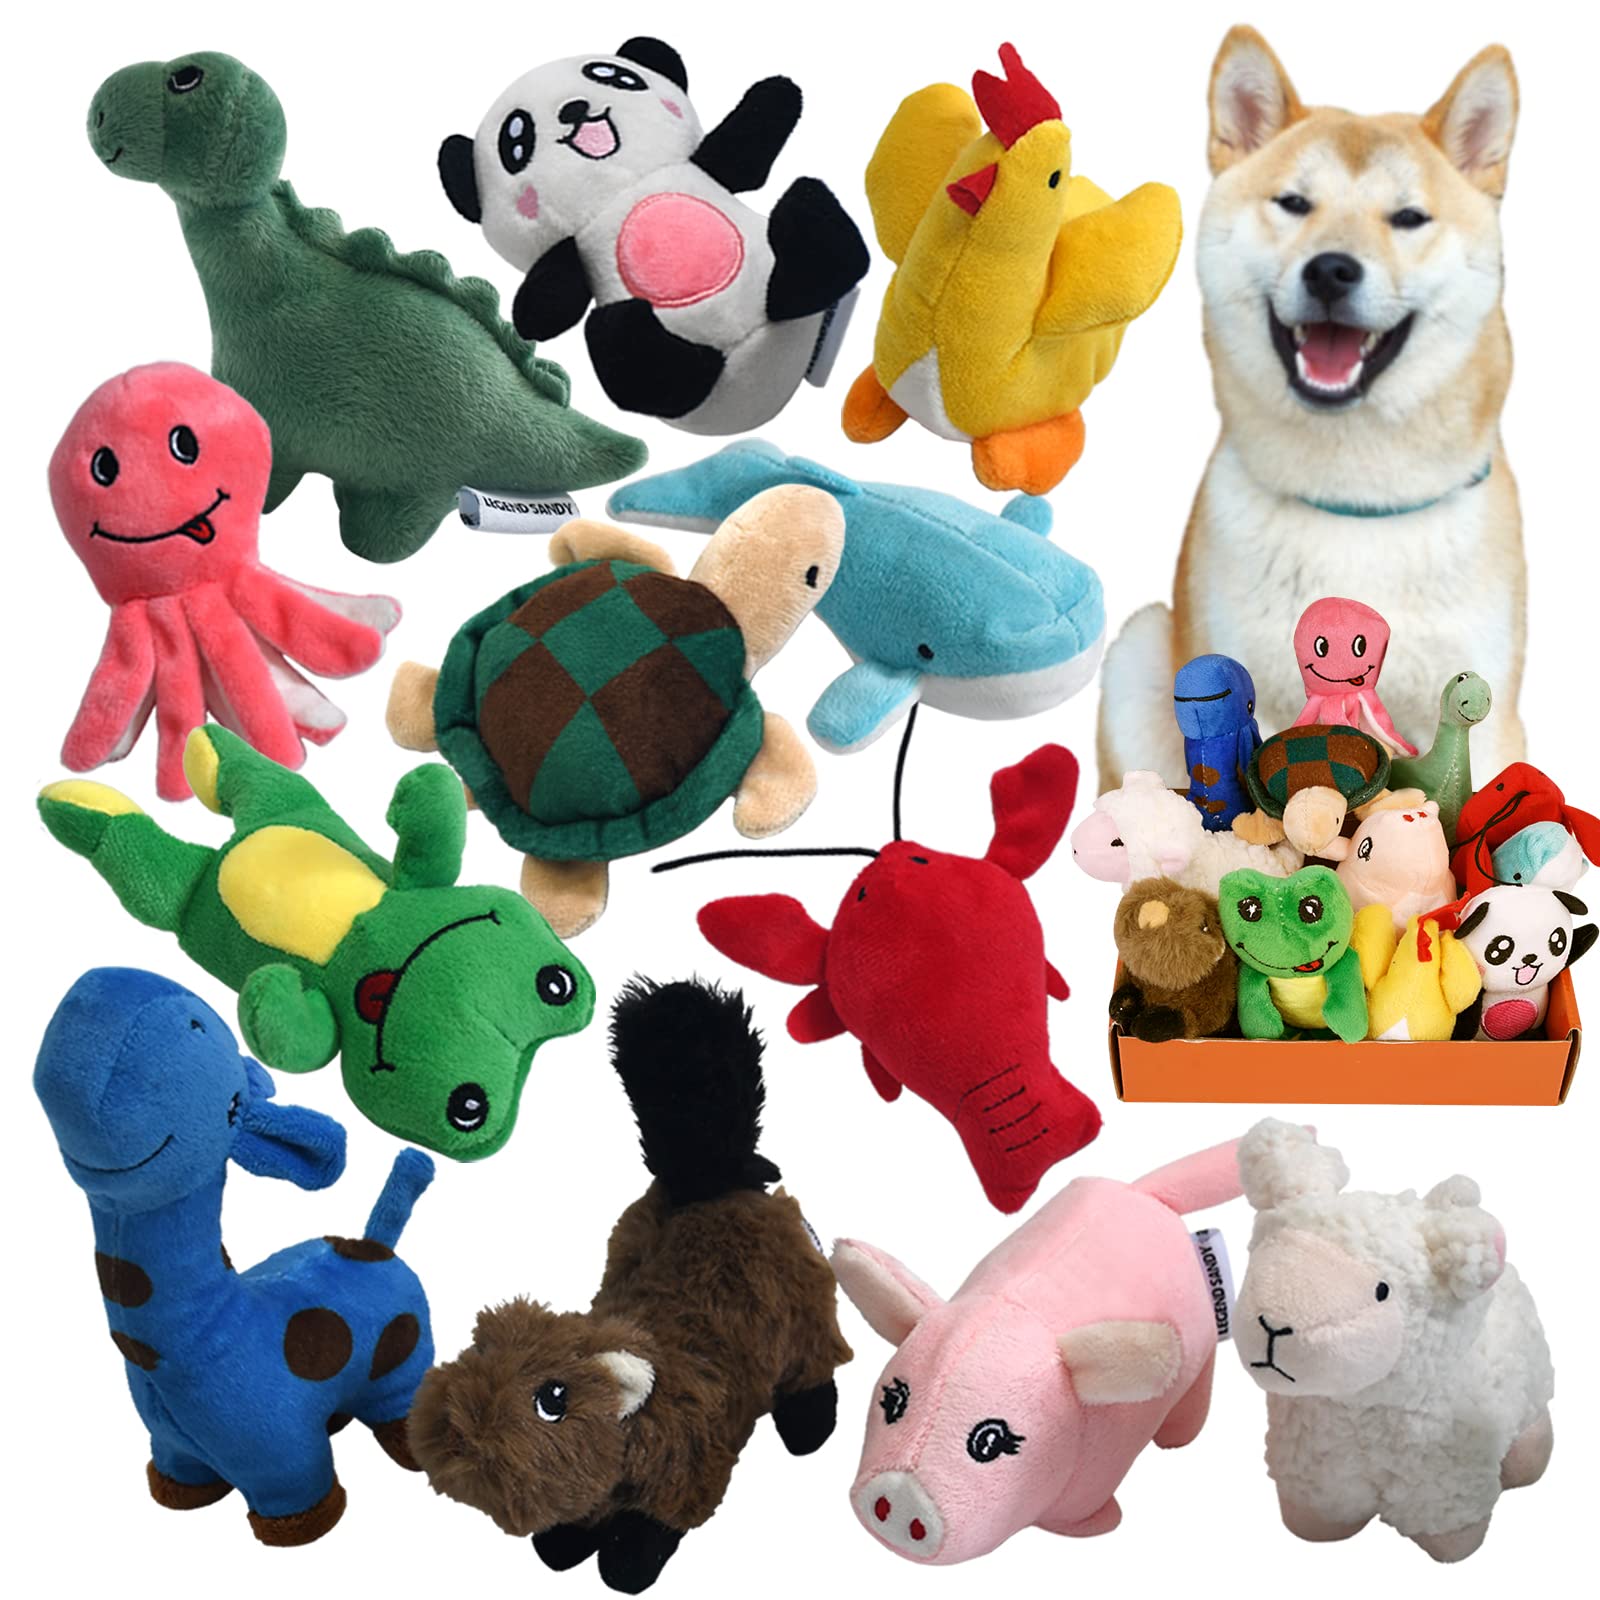 Book Cover LEGEND SANDY Squeaky Plush Dog Toy Pack for Puppy, Small Stuffed Puppy Chew Toys 12 Dog Toys Bulk with Squeakers, Cute Soft Pet Toy for Small Medium Size Dogs